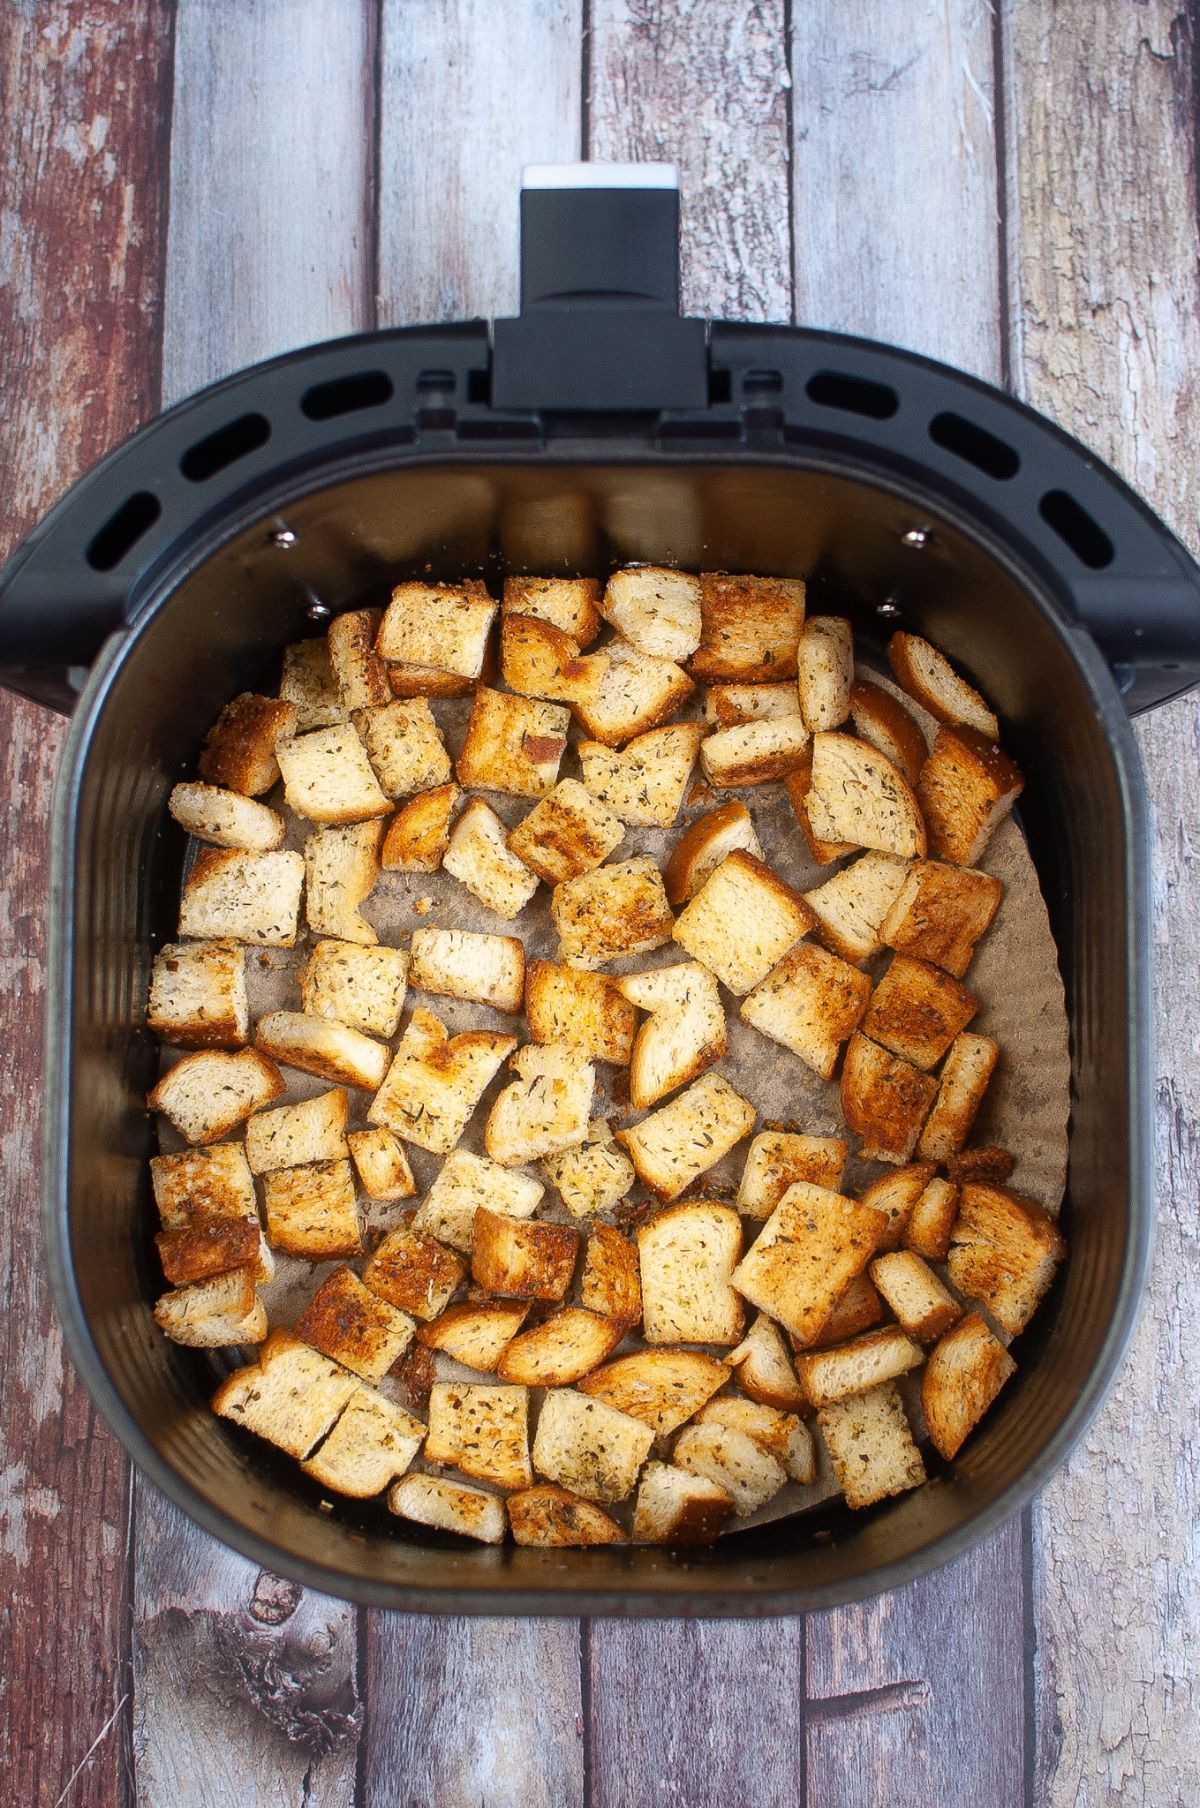 Croutons inside the Air Fryer.